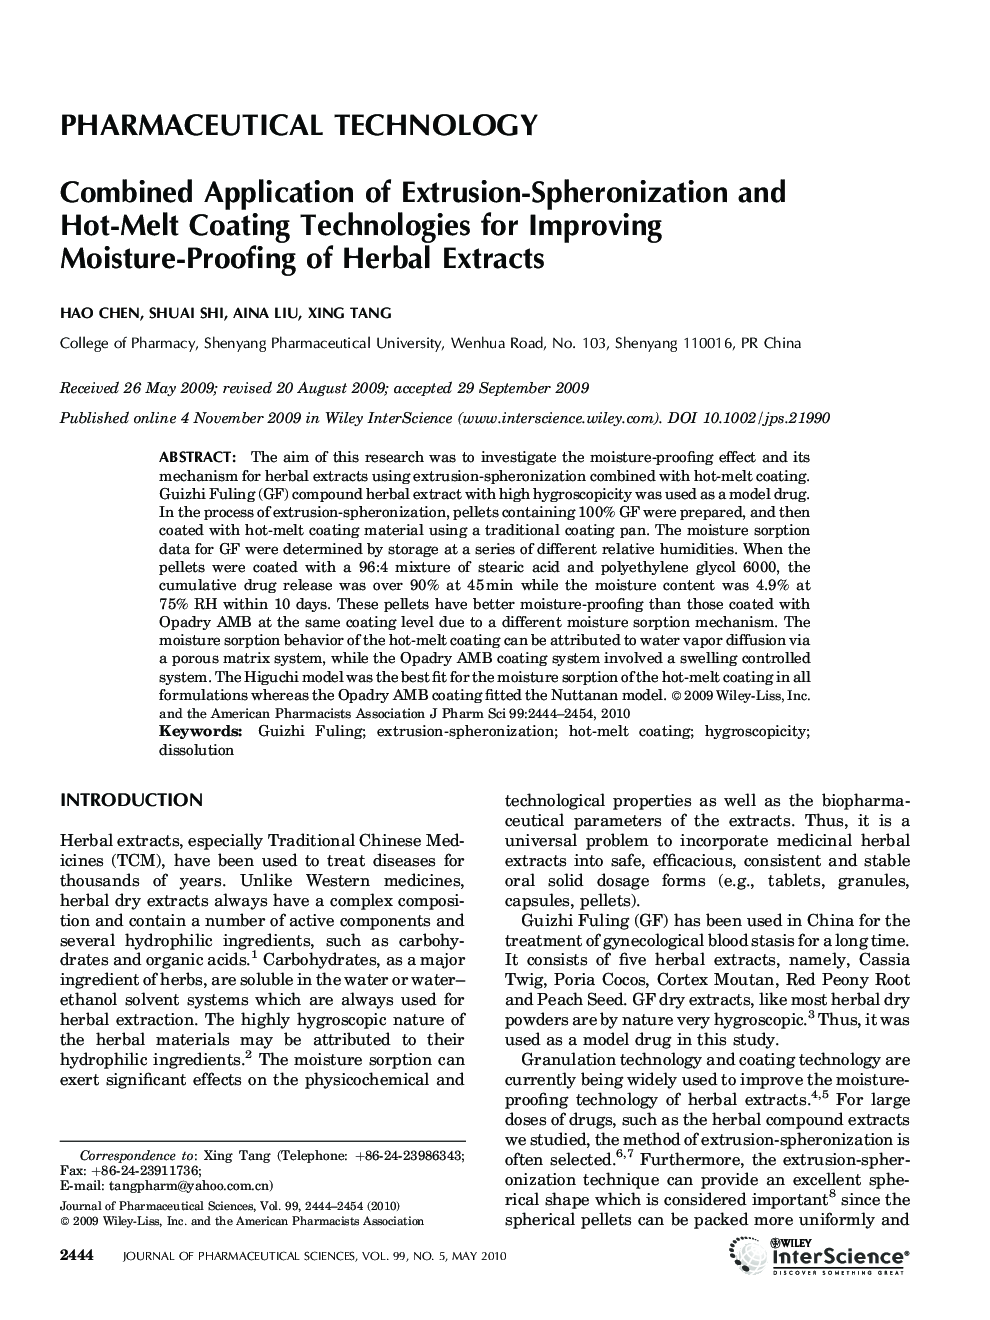 Combined application of extrusion-spheronization and hot-melt coating technologies for improving moisture-proofing of herbal extracts